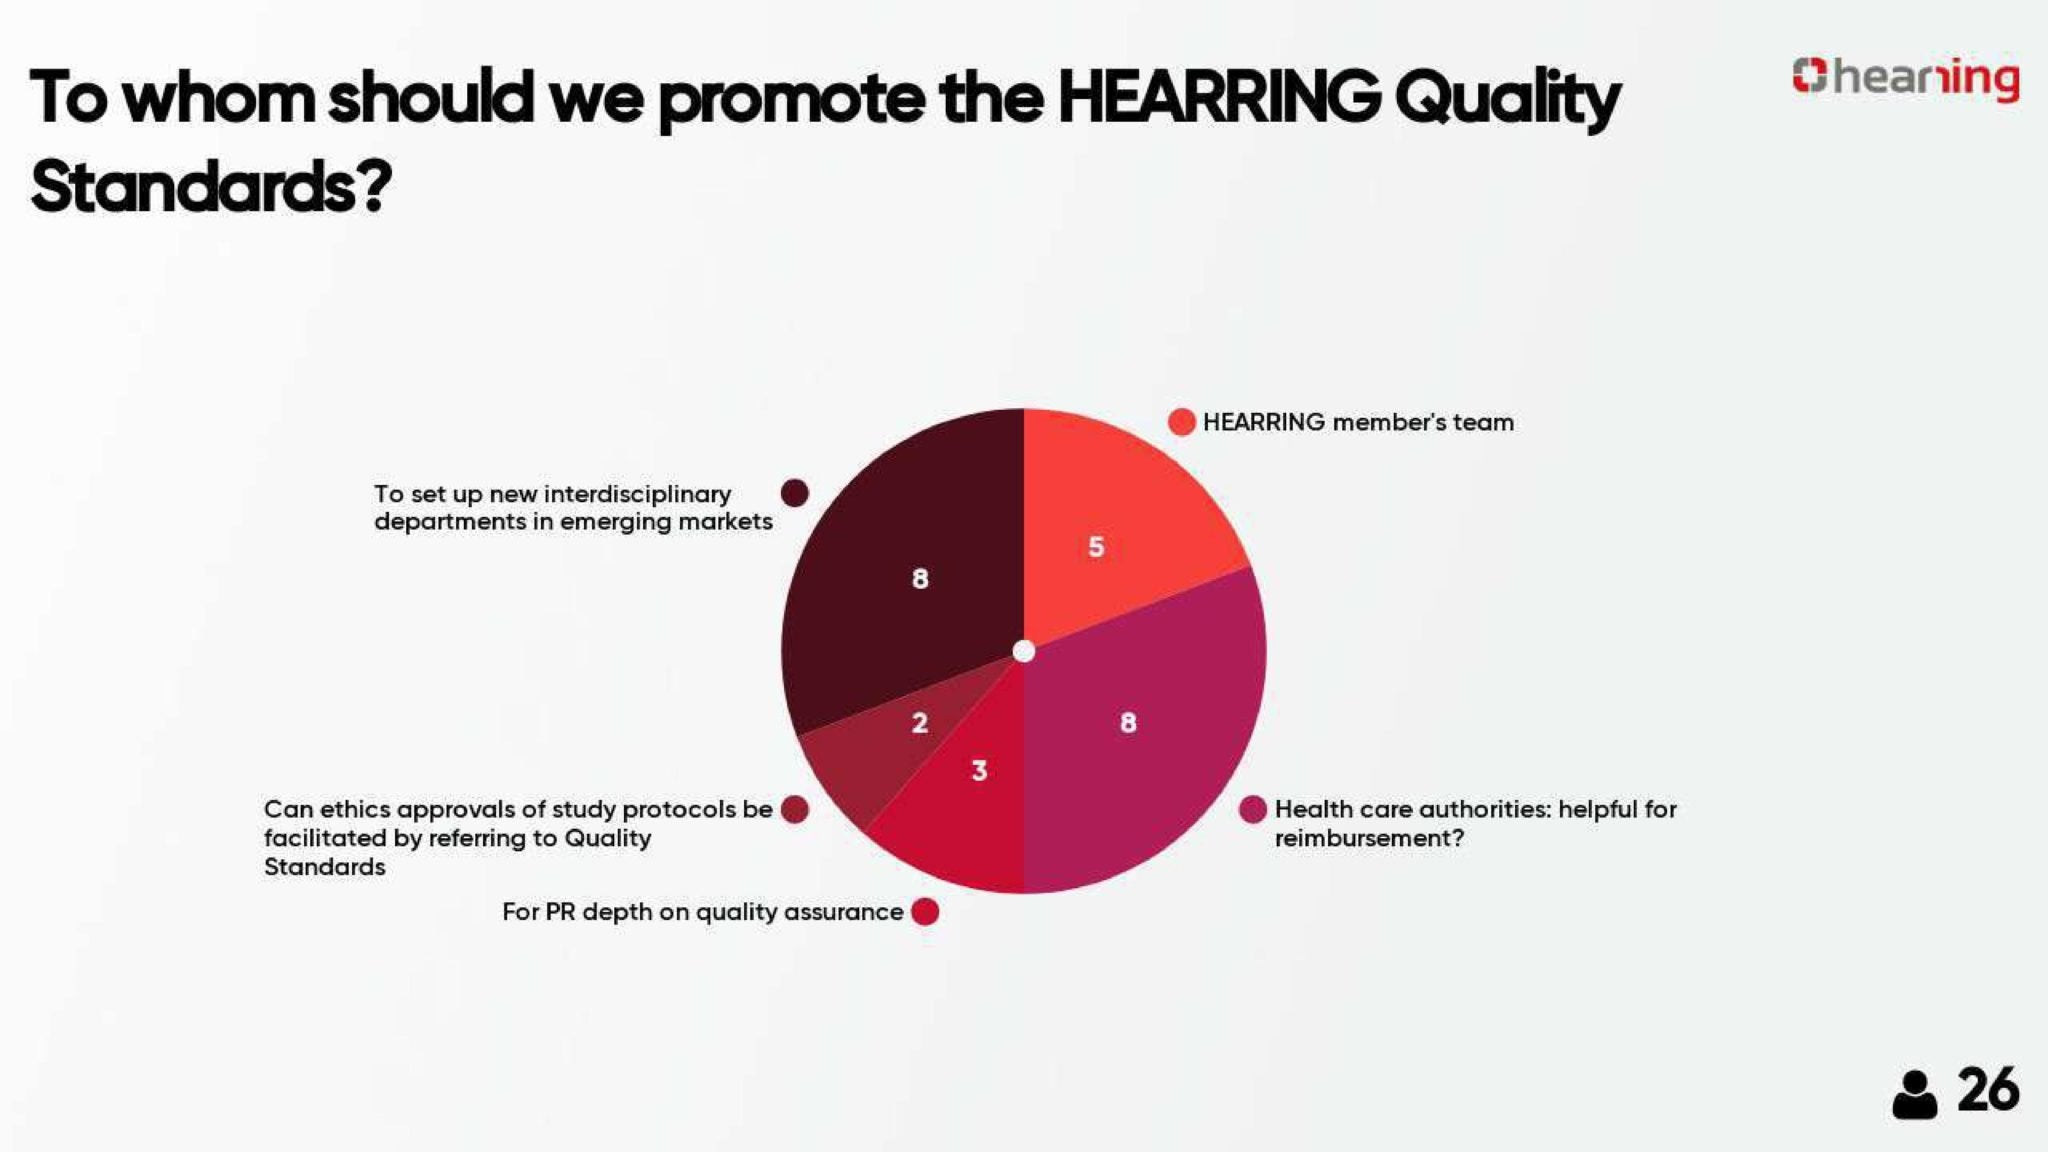 Hearring Quality Standards